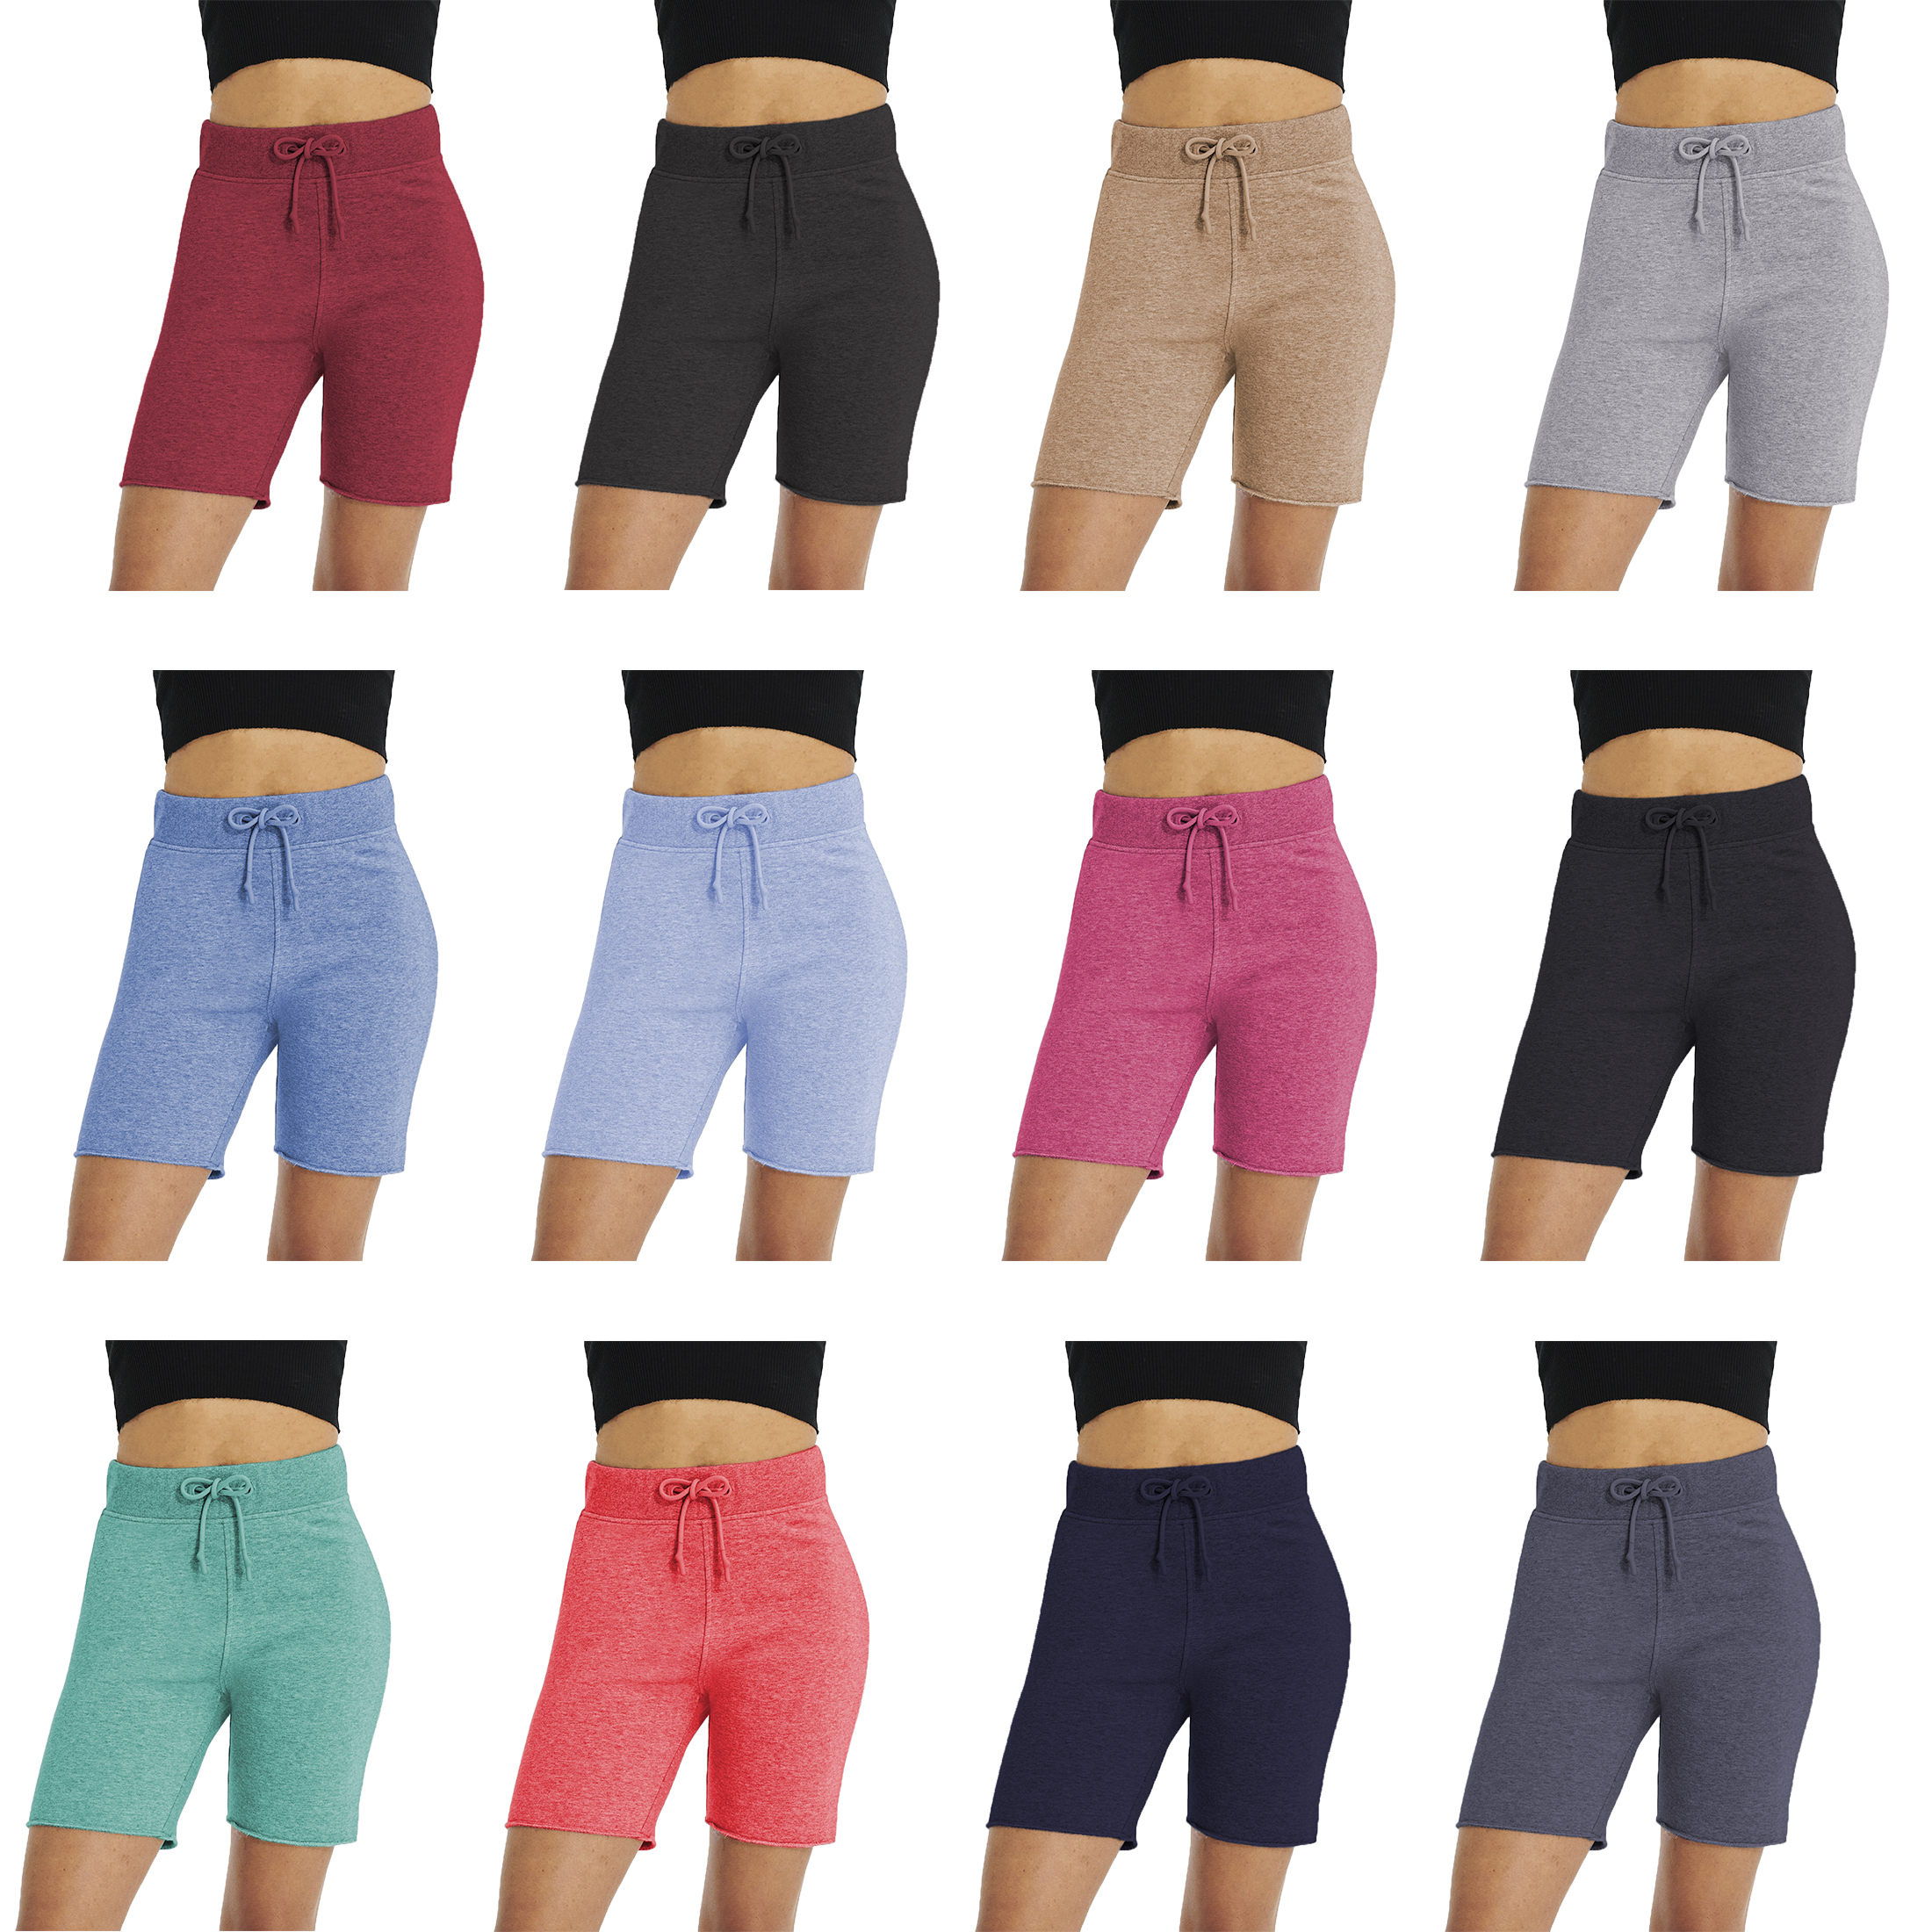 4-Pack Women’s Solid Summer Bermuda Shorts Soft Slim-Fit Stretchy Active Athletic Skinny Ladies Pants - XXL